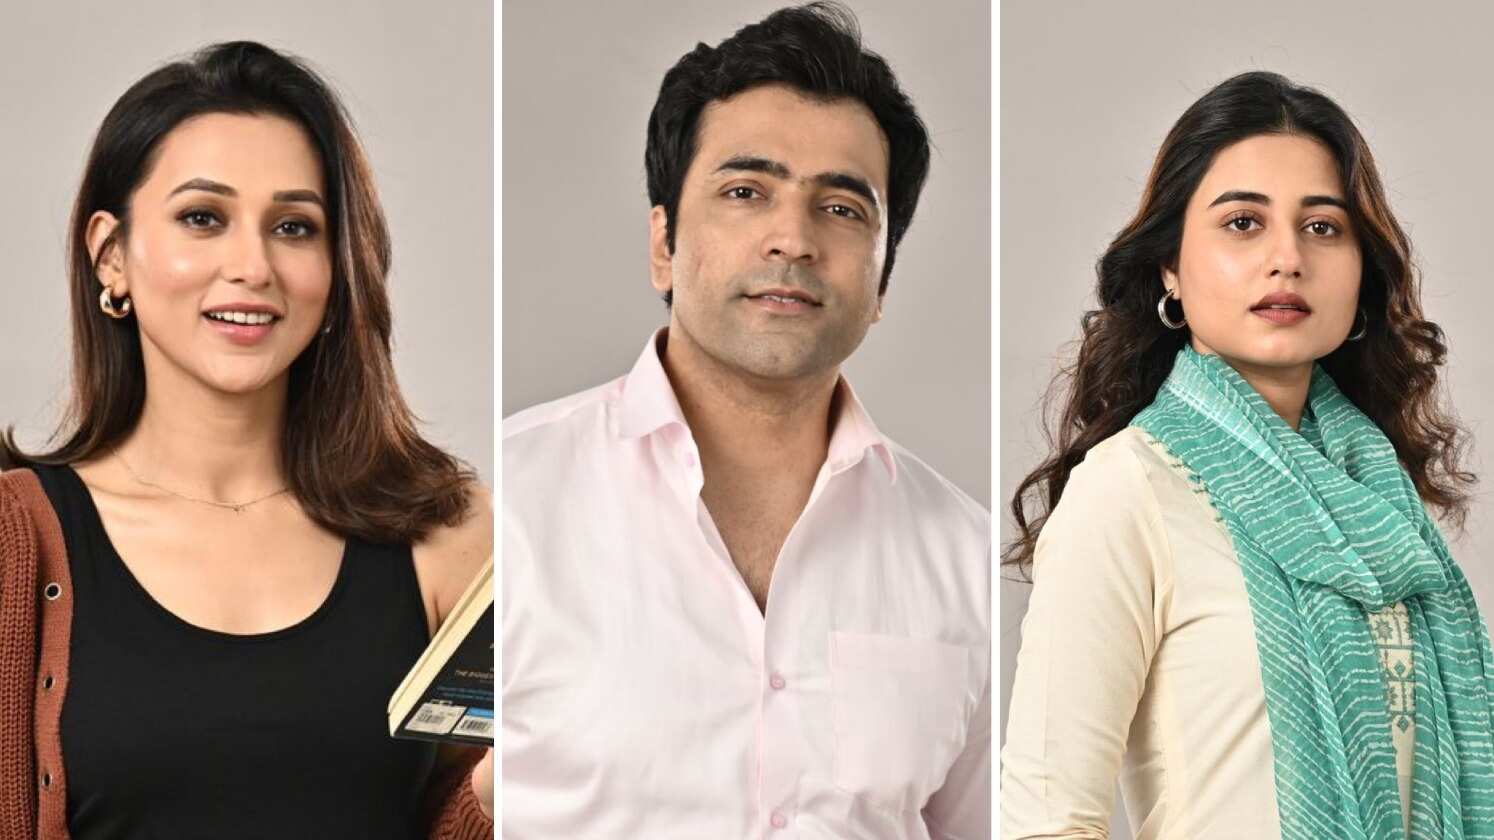 https://www.mobilemasala.com/film-gossip/Aalap-The-poster-of-Mimi-Chakraborty-and-Abir-Chatterjees-romcom-is-dropped-i229314